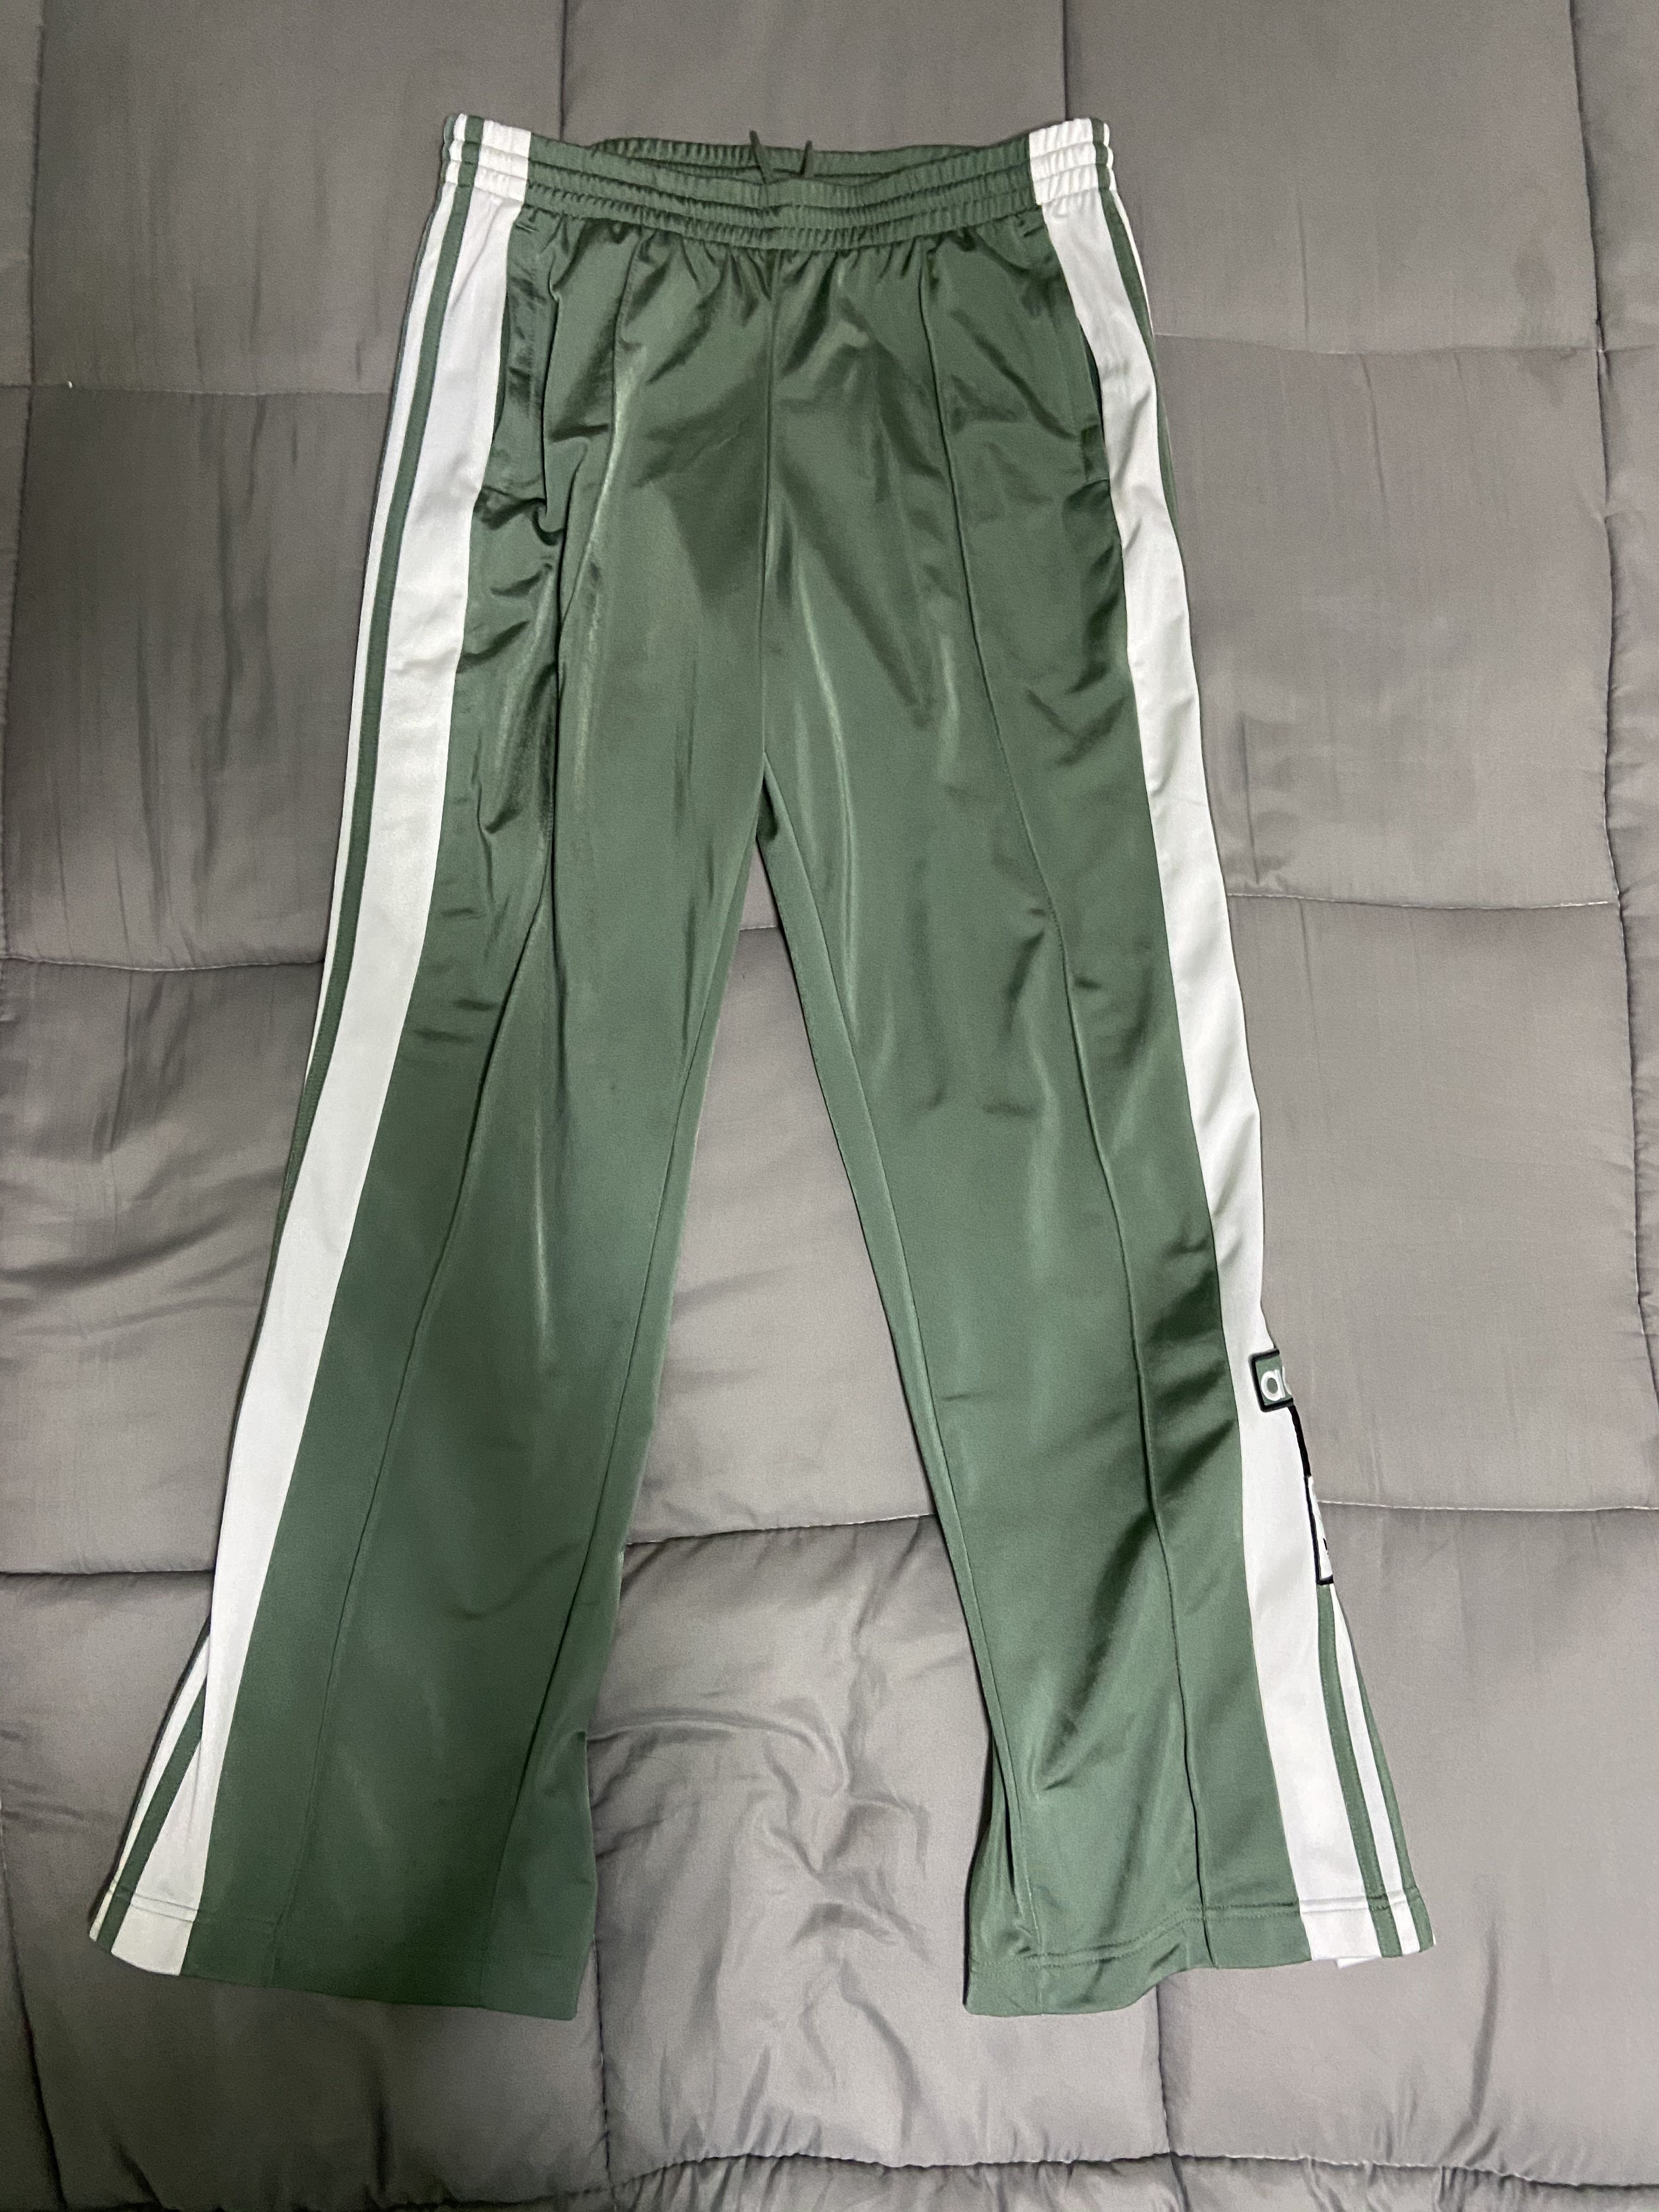 adidas button up track pants